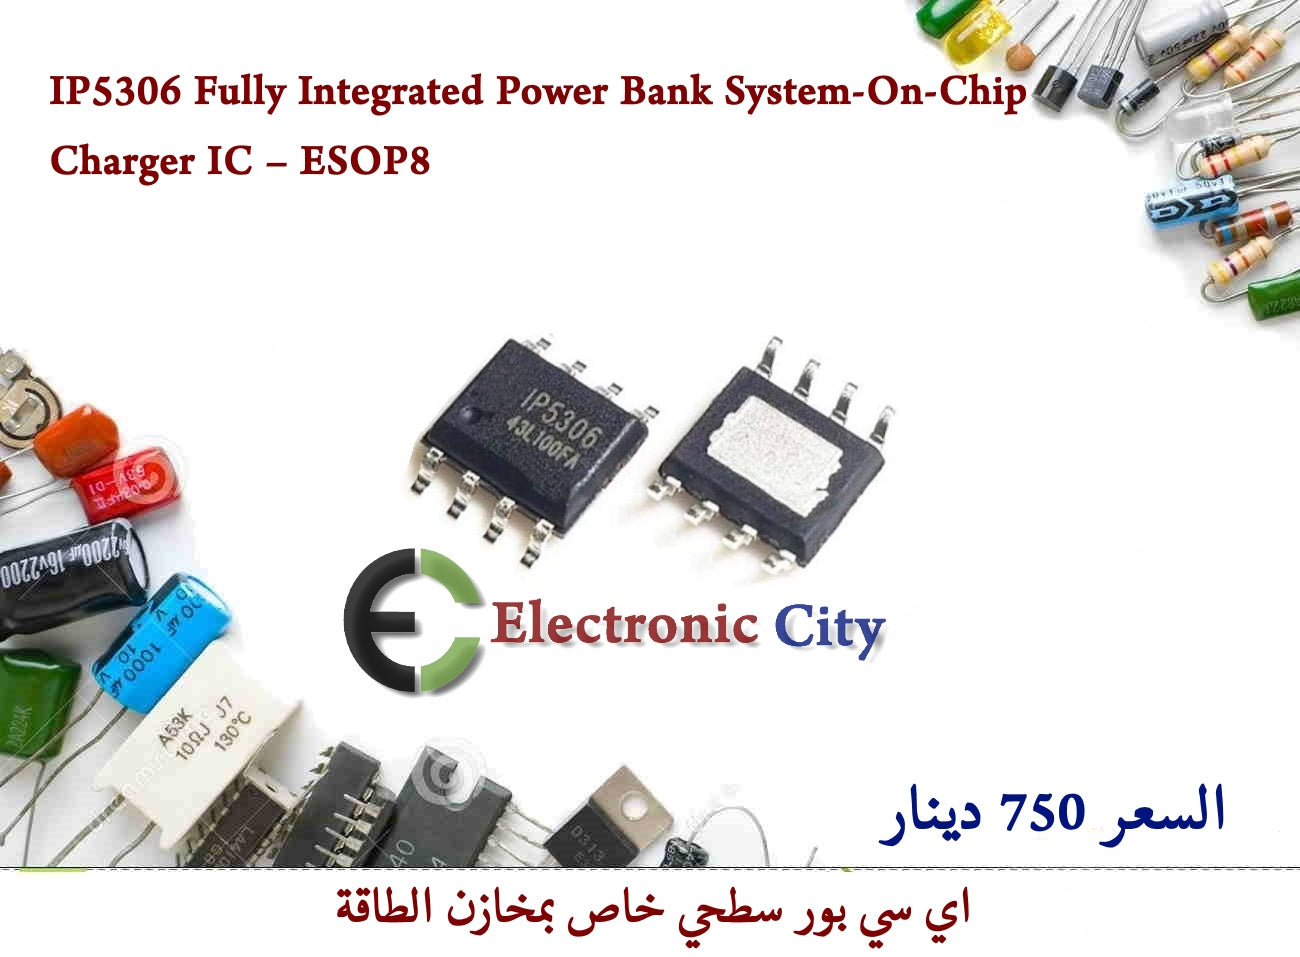 IP5306 Fully Integrated Power Bank System-On-Chip Charger IC – ESOP8